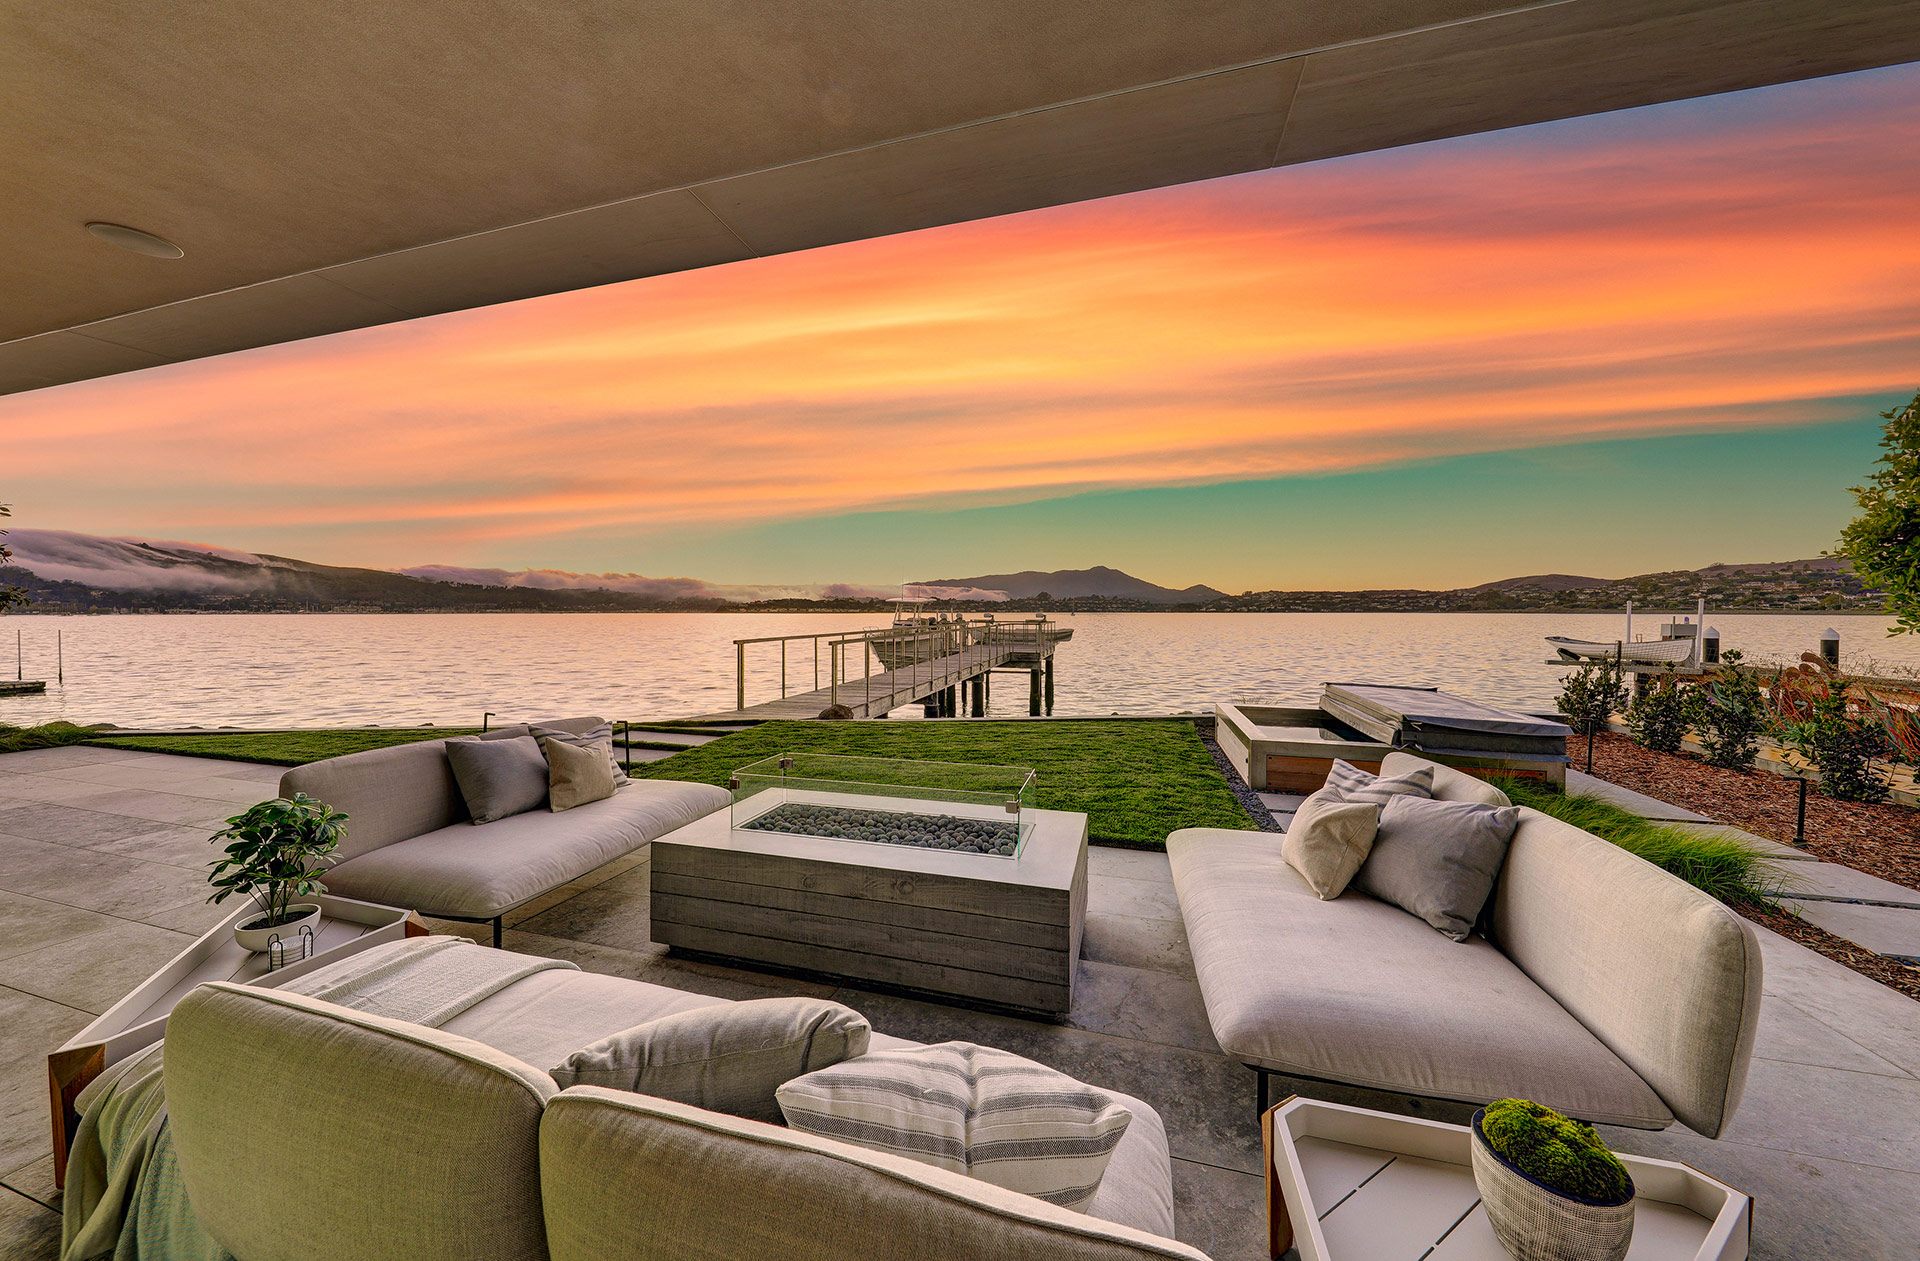 Display Image for Patio at sunset